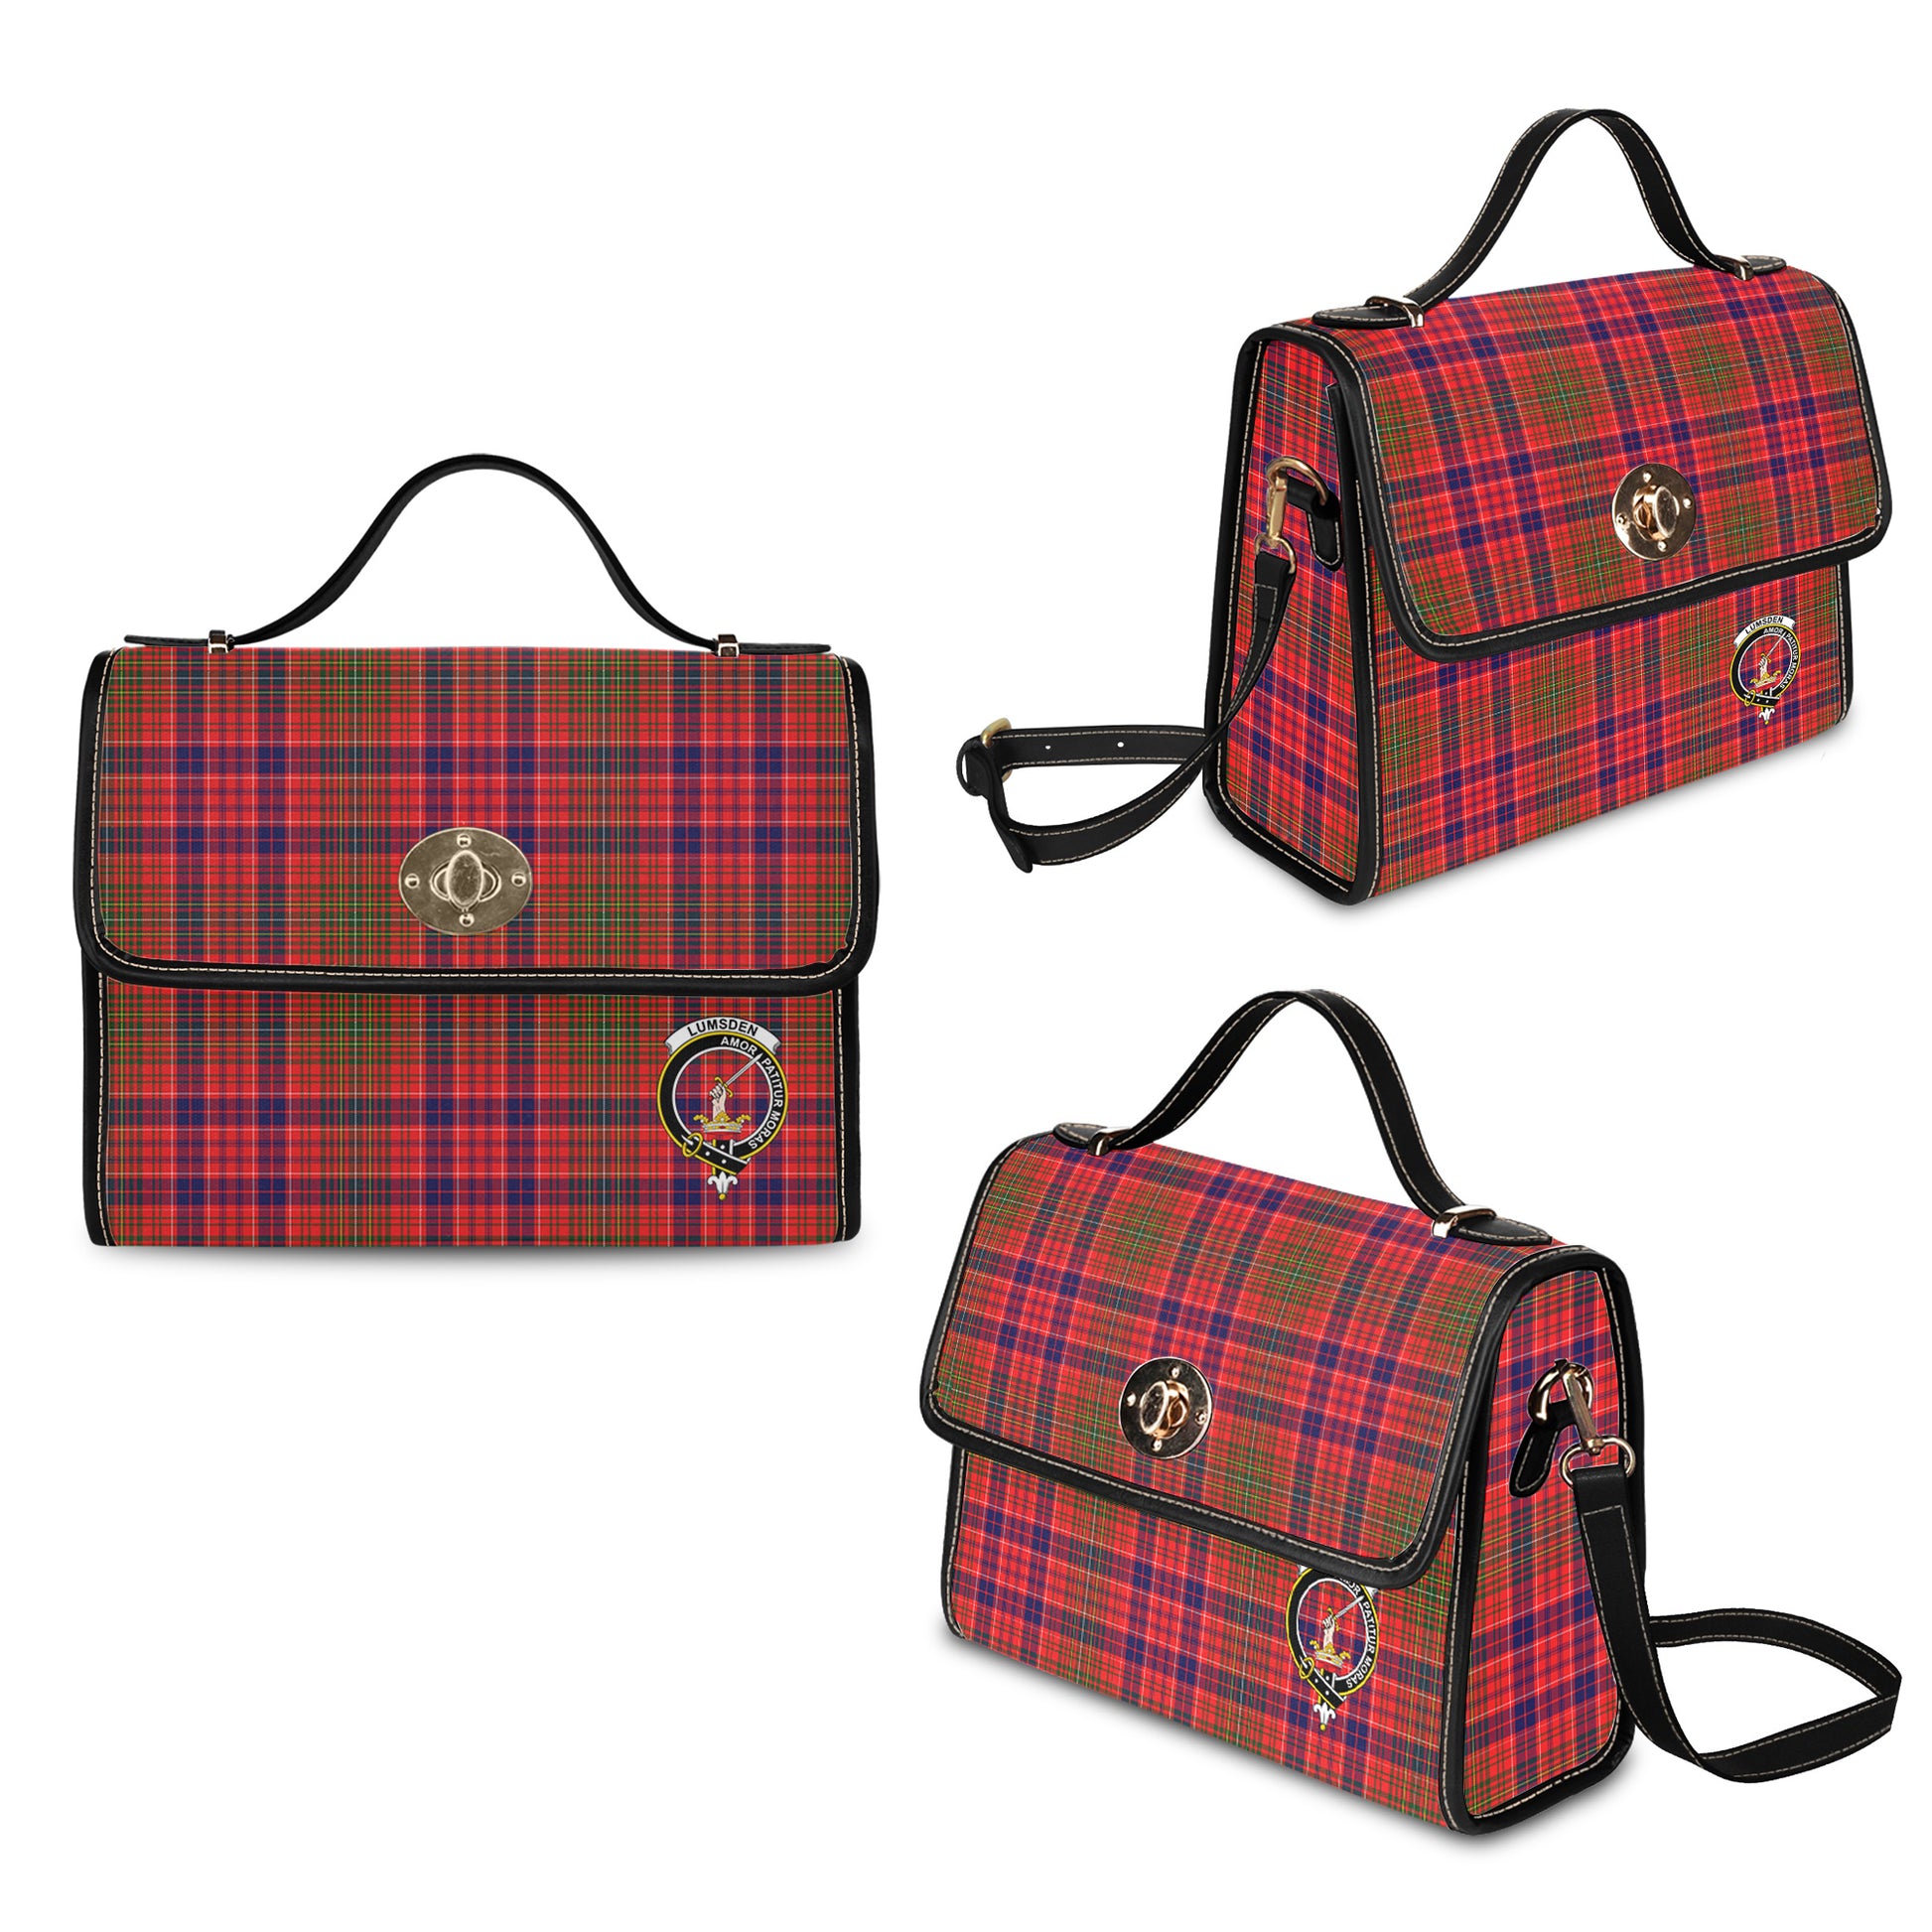 lumsden-modern-tartan-leather-strap-waterproof-canvas-bag-with-family-crest